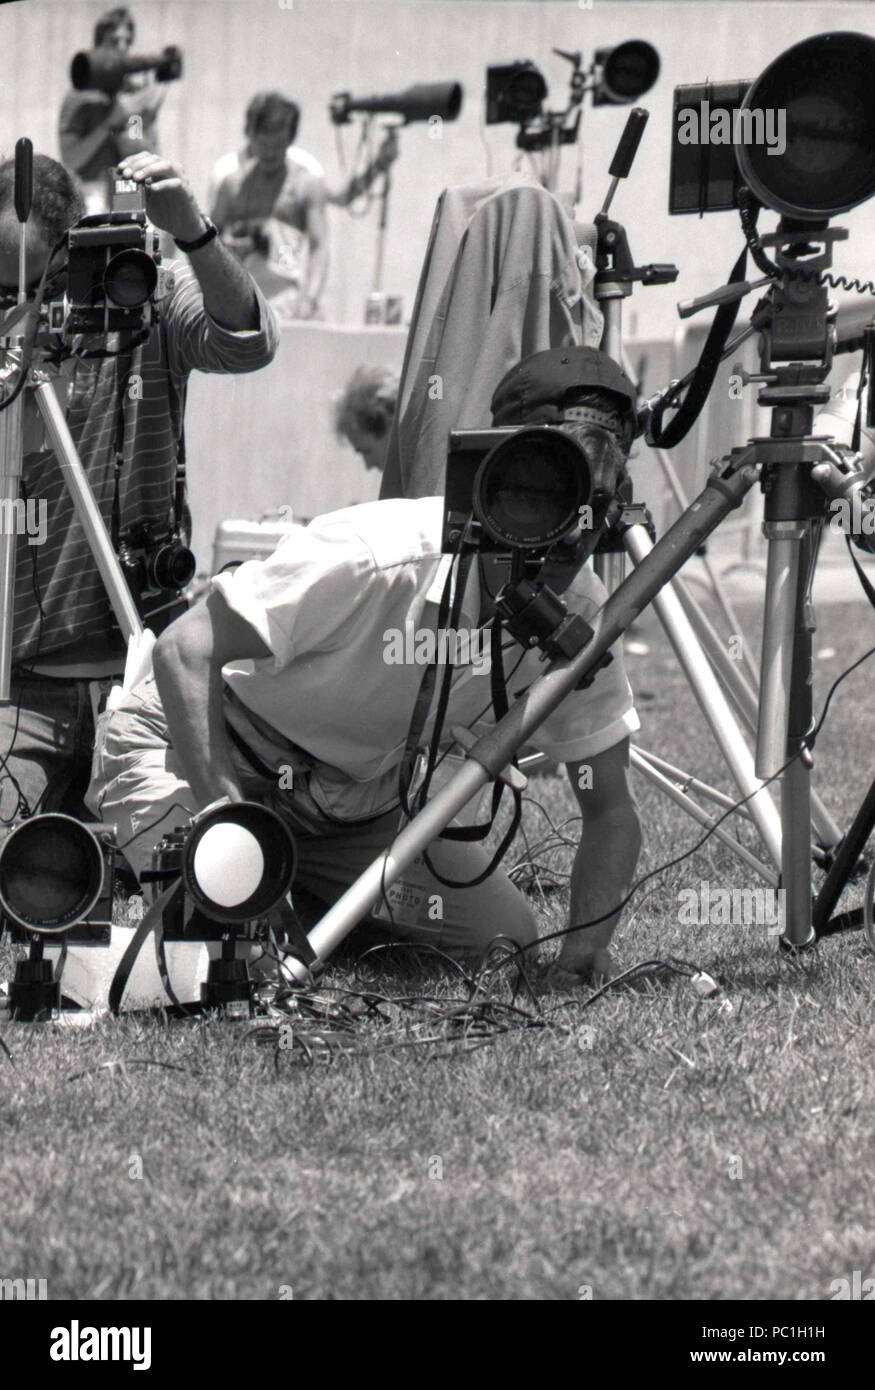 Photojournalists setting up their cameras during sports event, 1990s Stock Photo